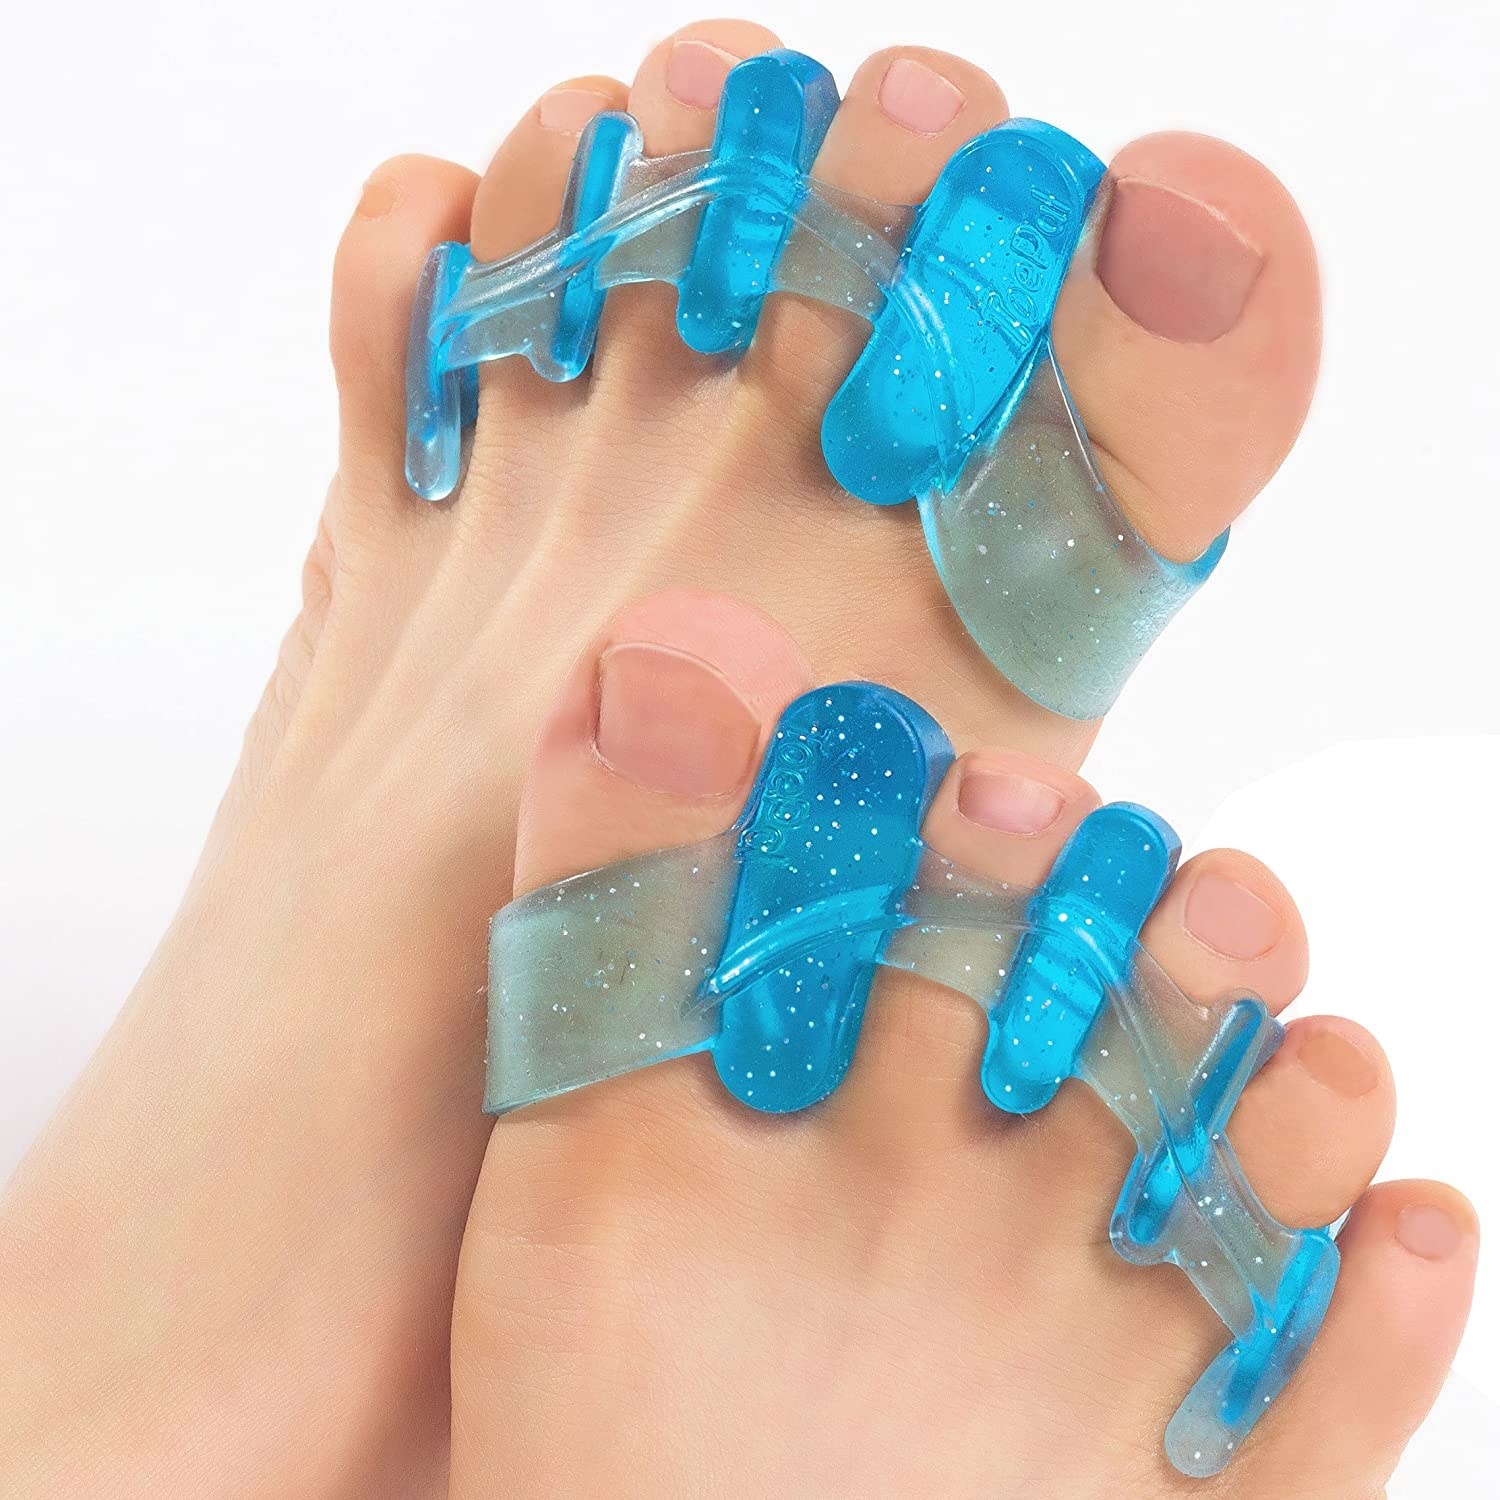 A person&#x27;s feet with toe separators between their toes